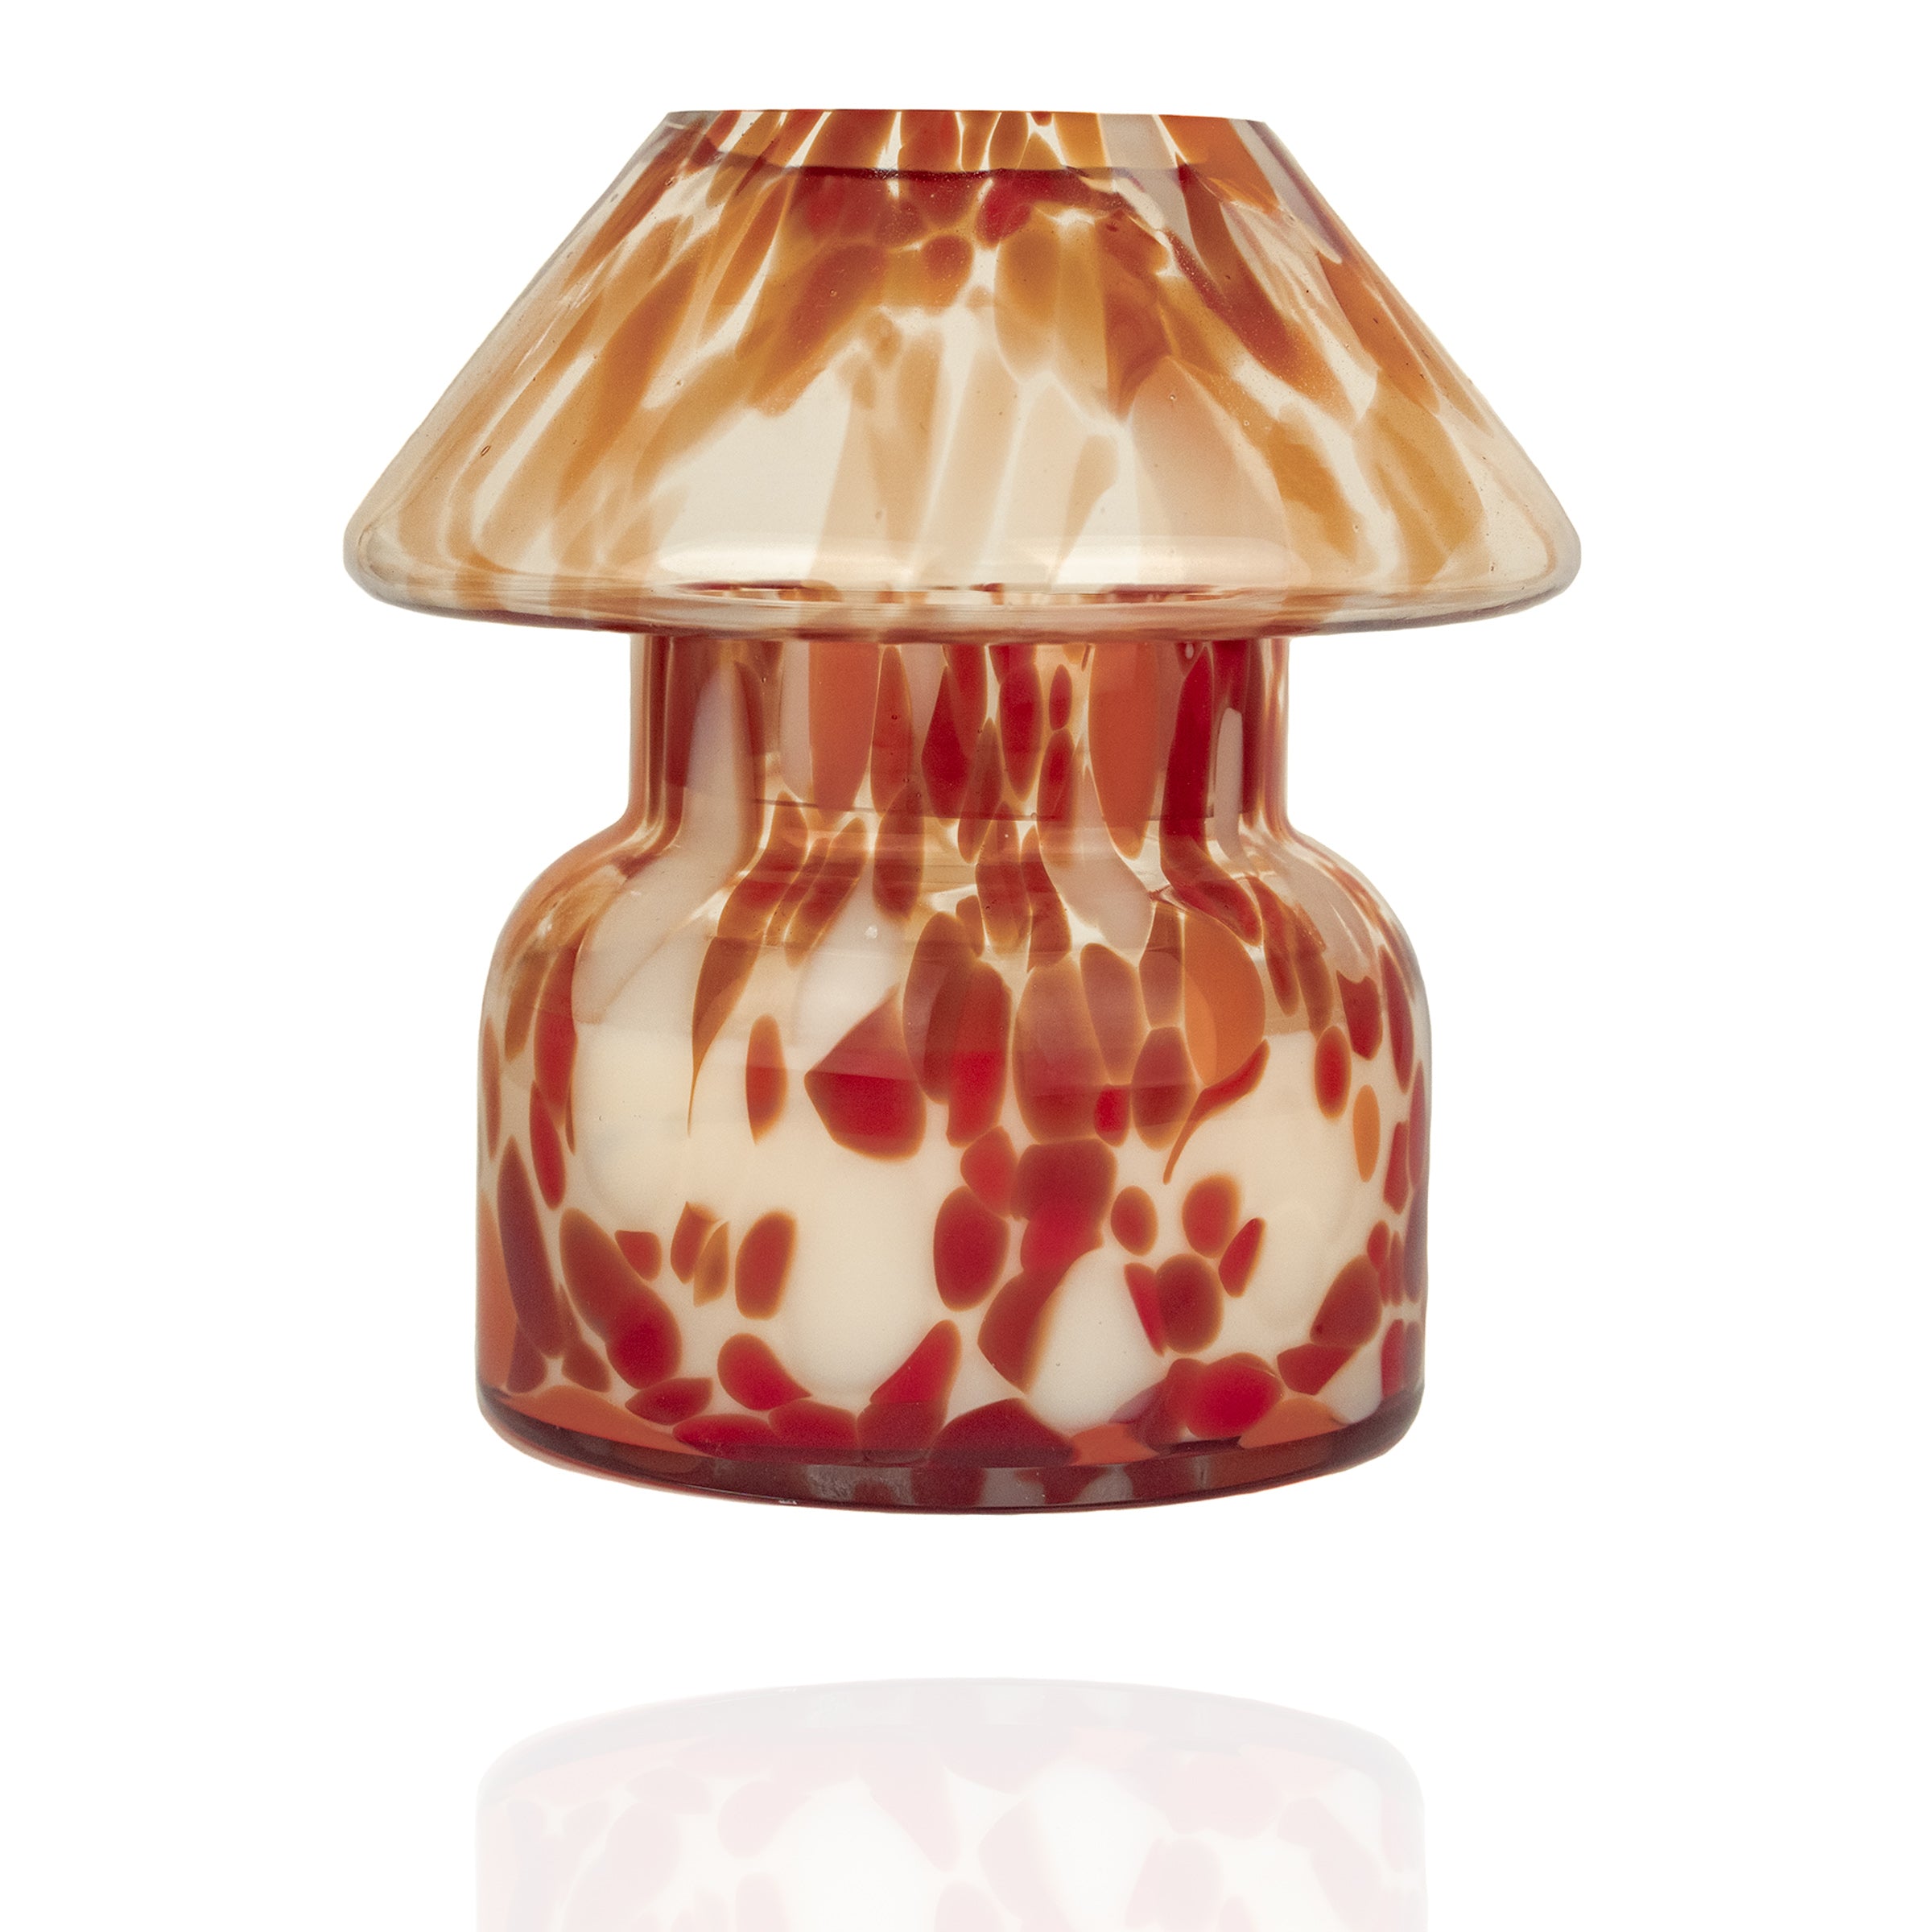 Mushroom candle lamp with red, orange and white spots on clear glass. Retro lamp is filled with 100% soy wax